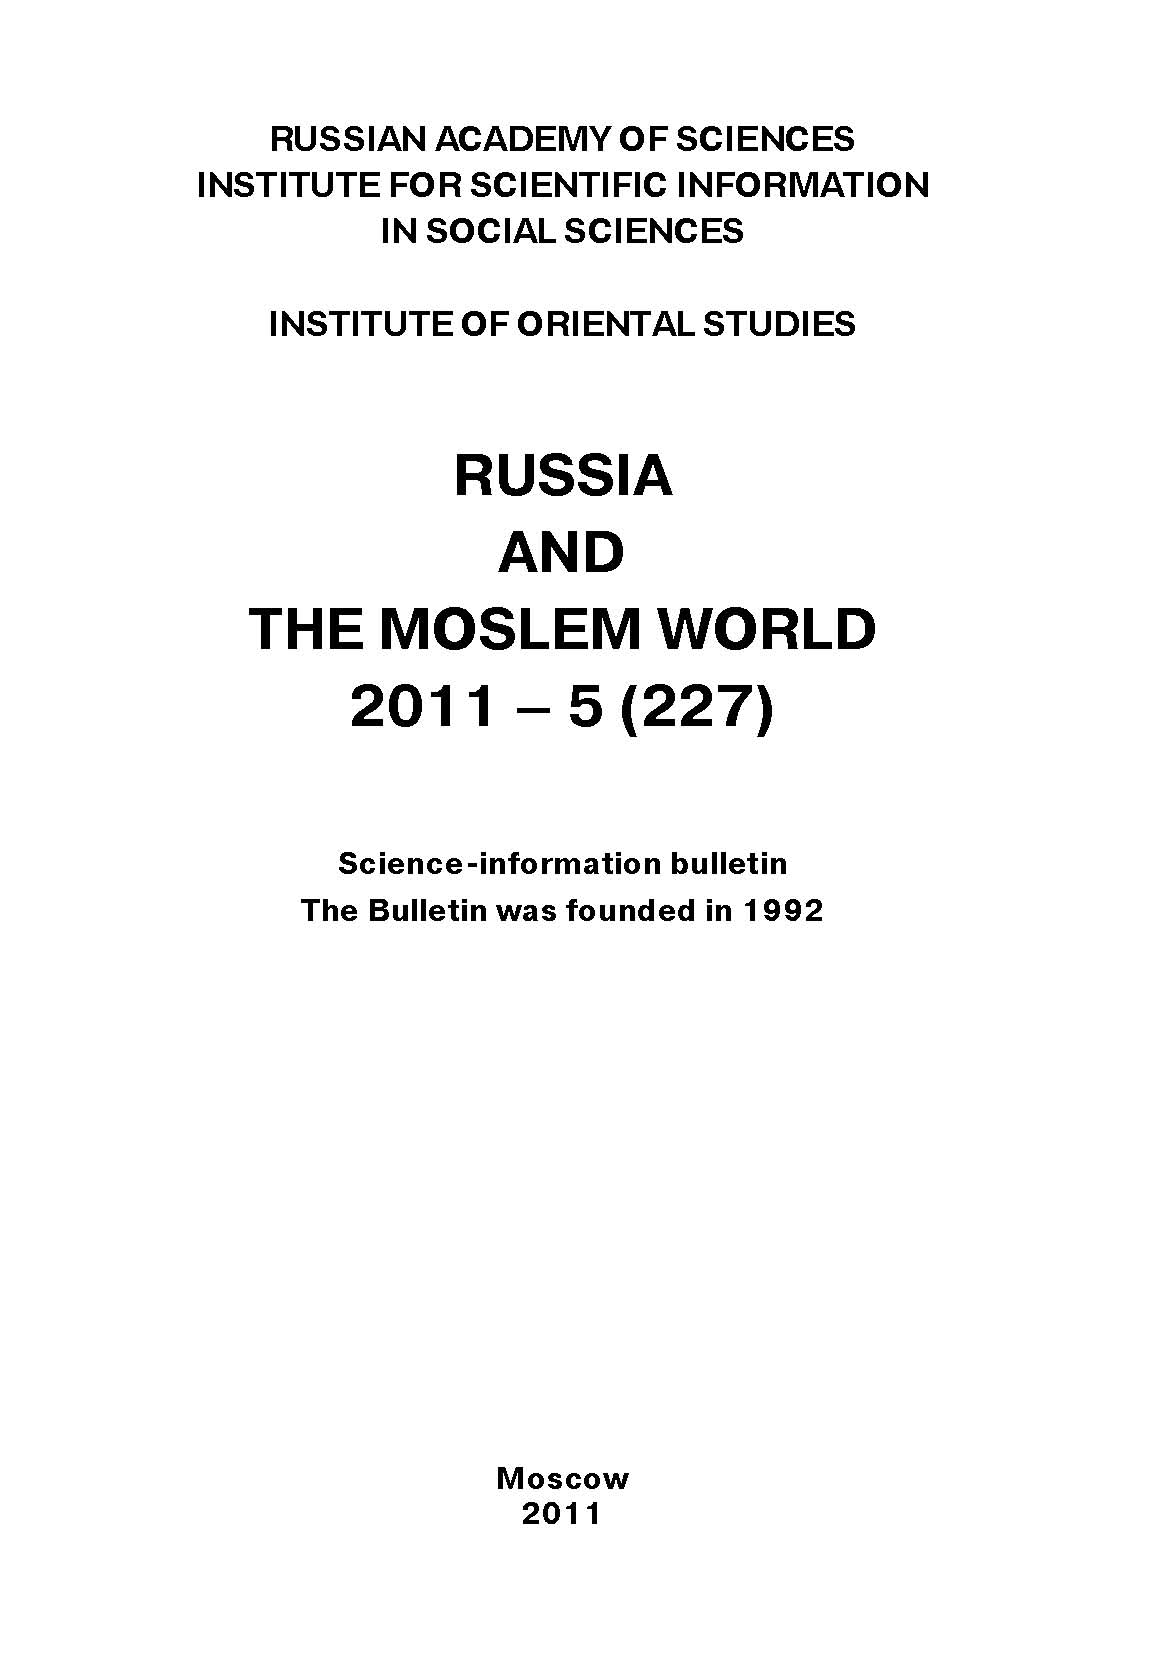 Russia and the Moslem World№ 05 / 2011